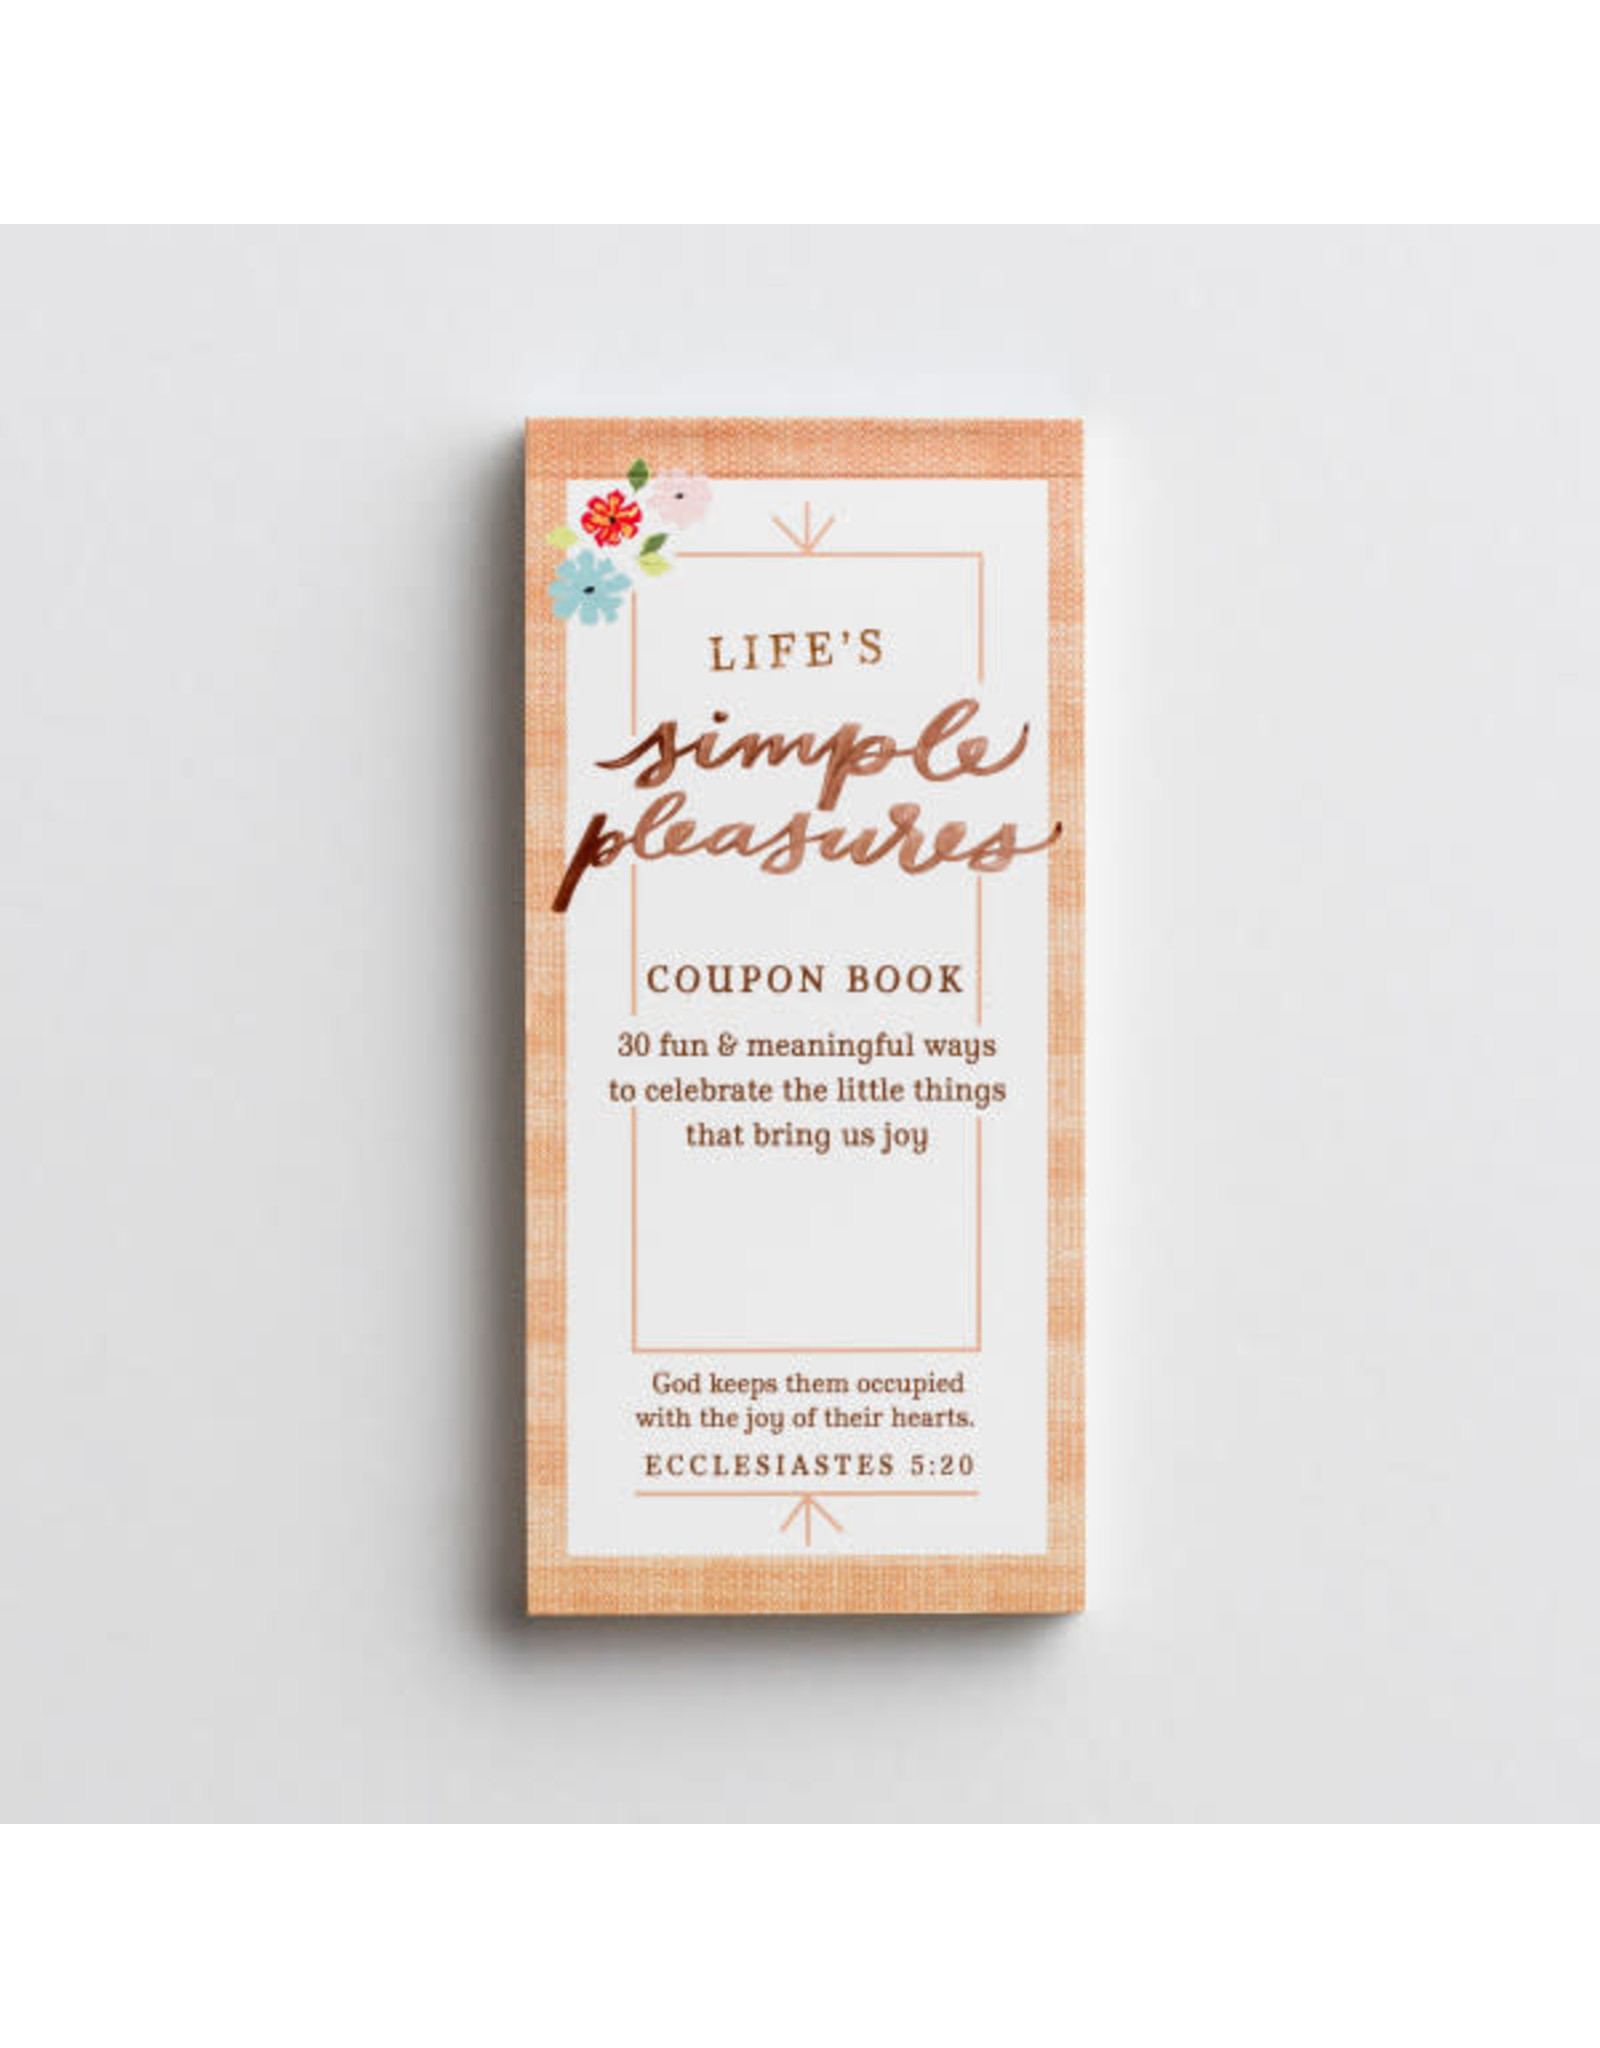 Life's Simple Pleasures Coupon Book